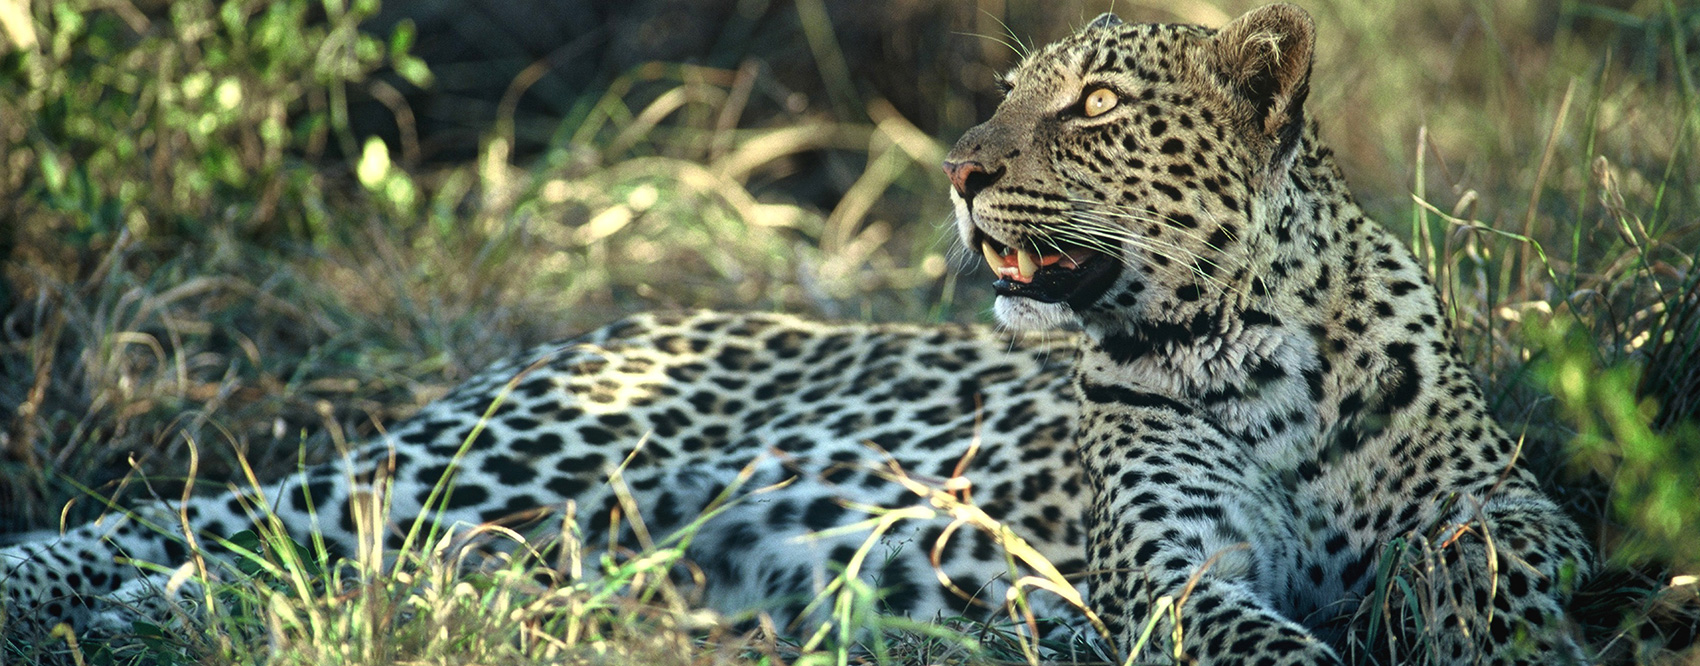 Dulini private game reserve images 6